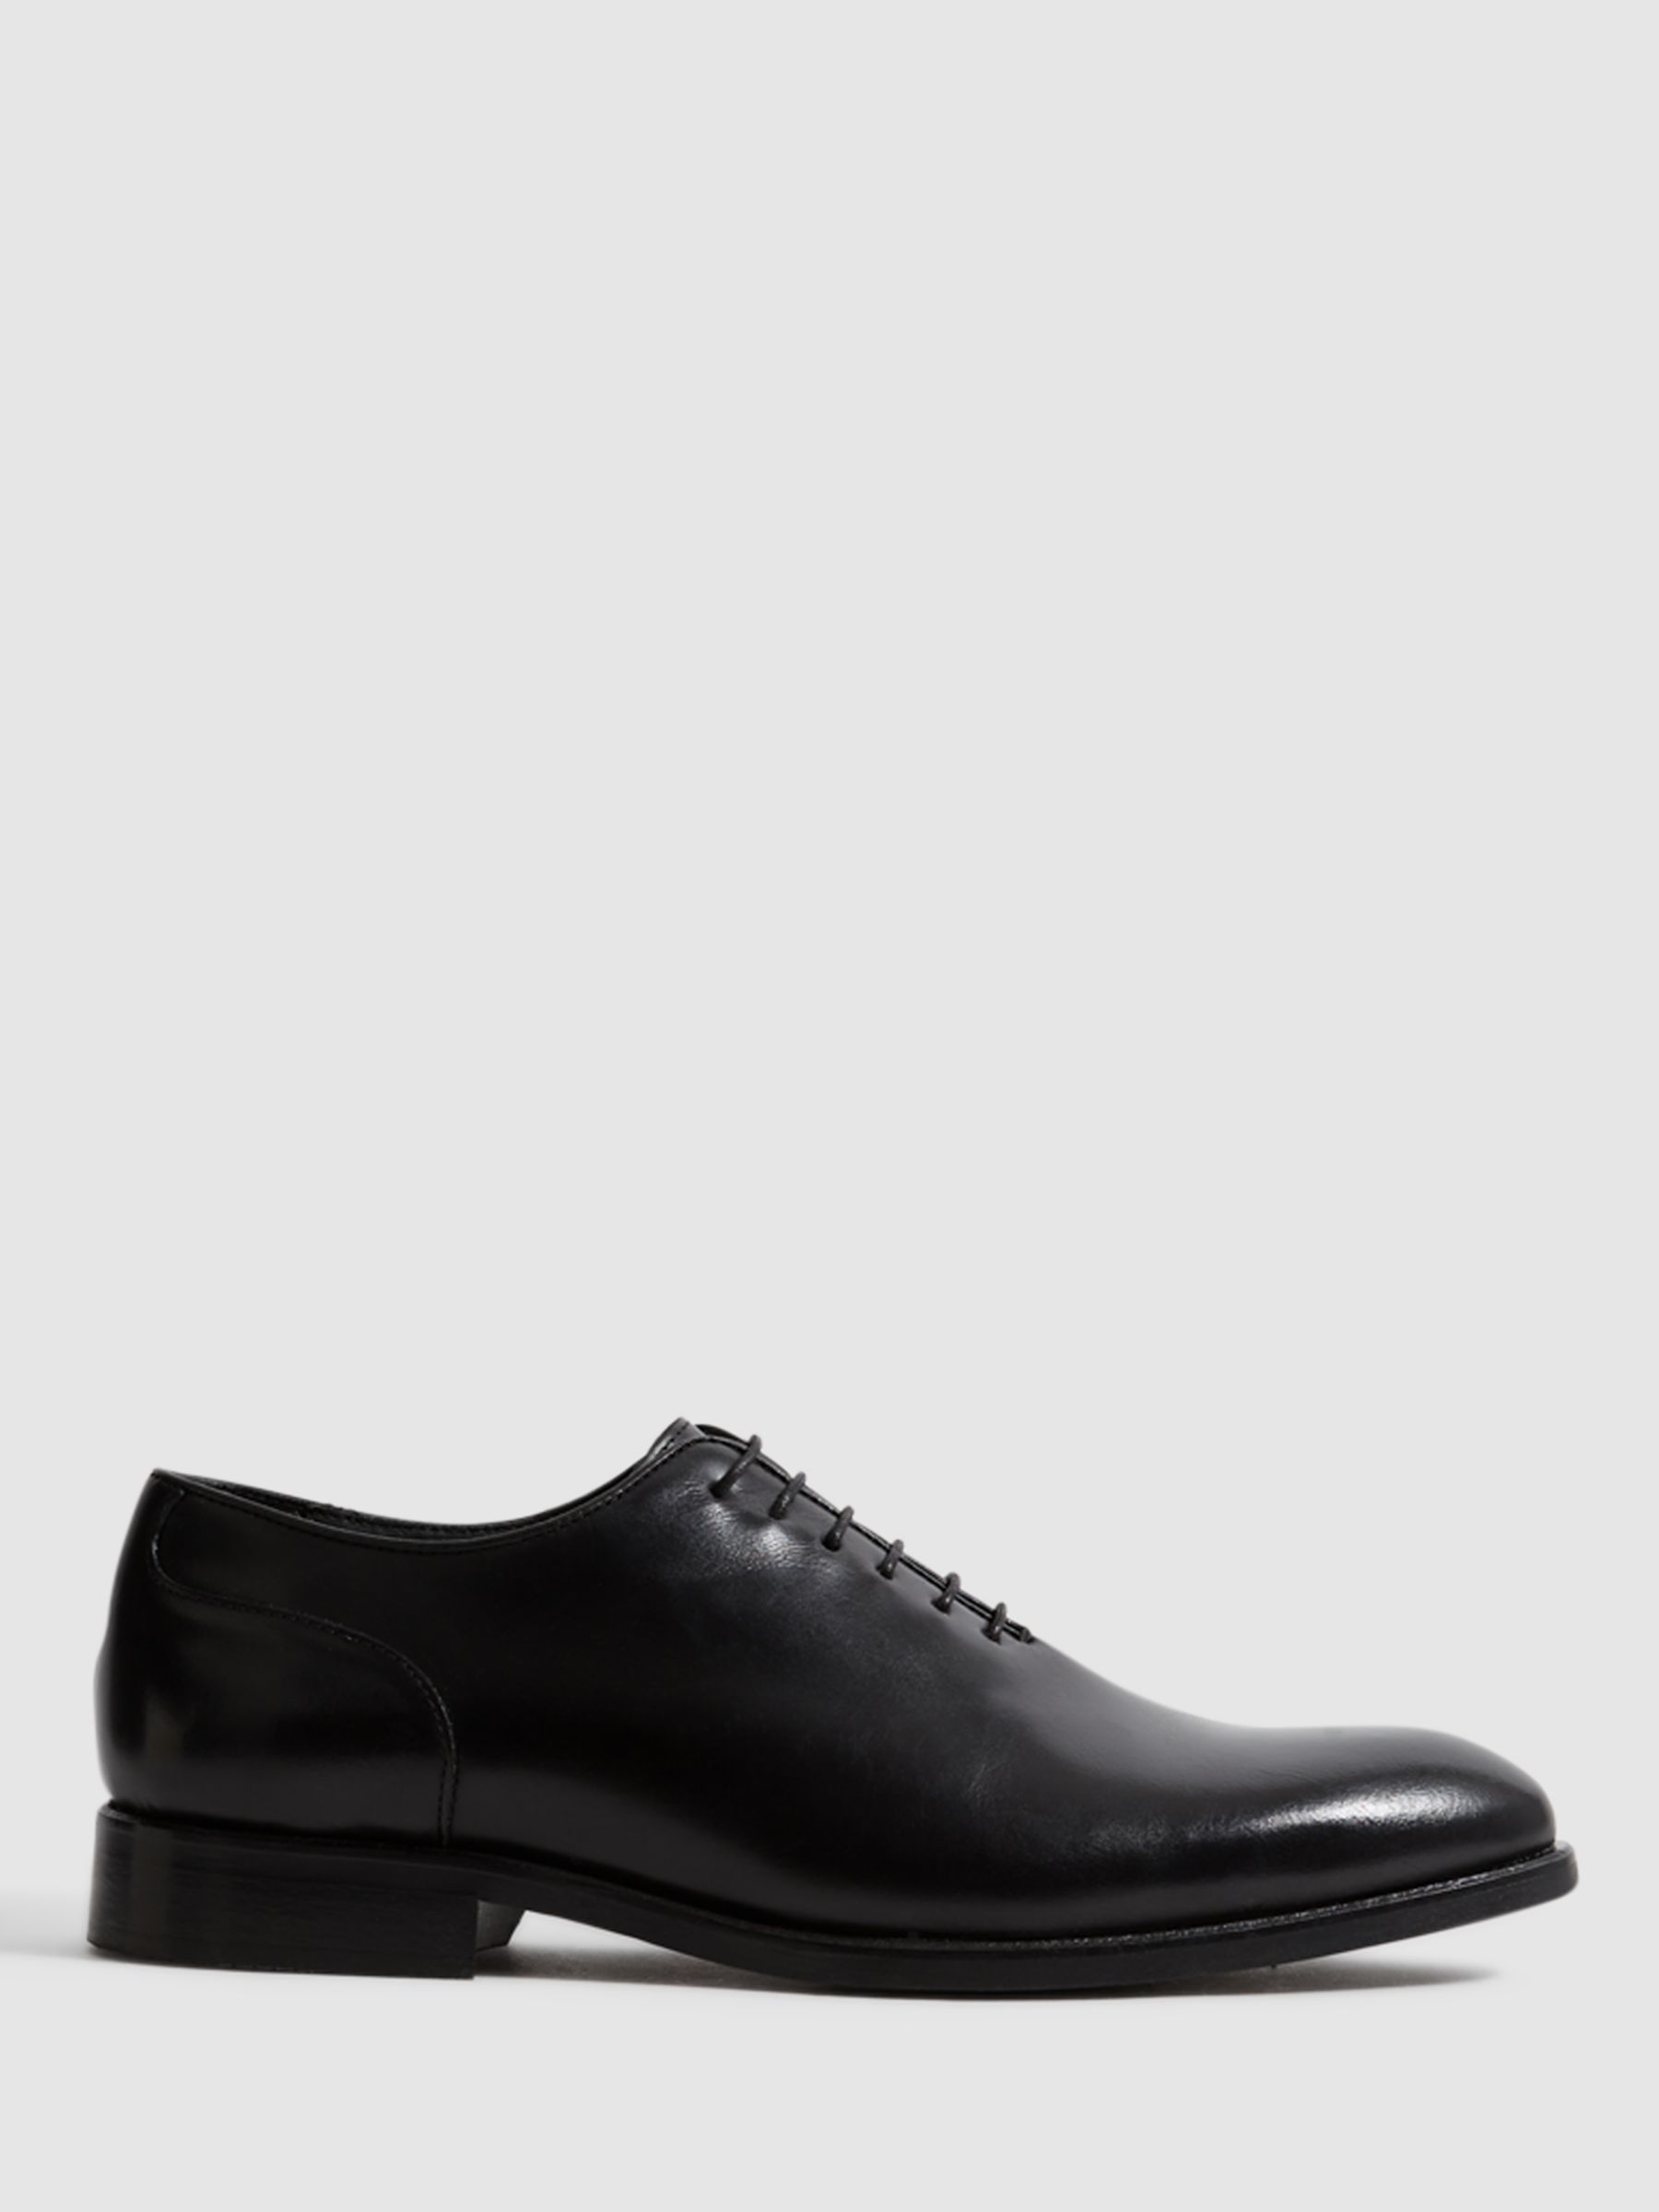 Reiss Bay Leather Whole Cut Shoes